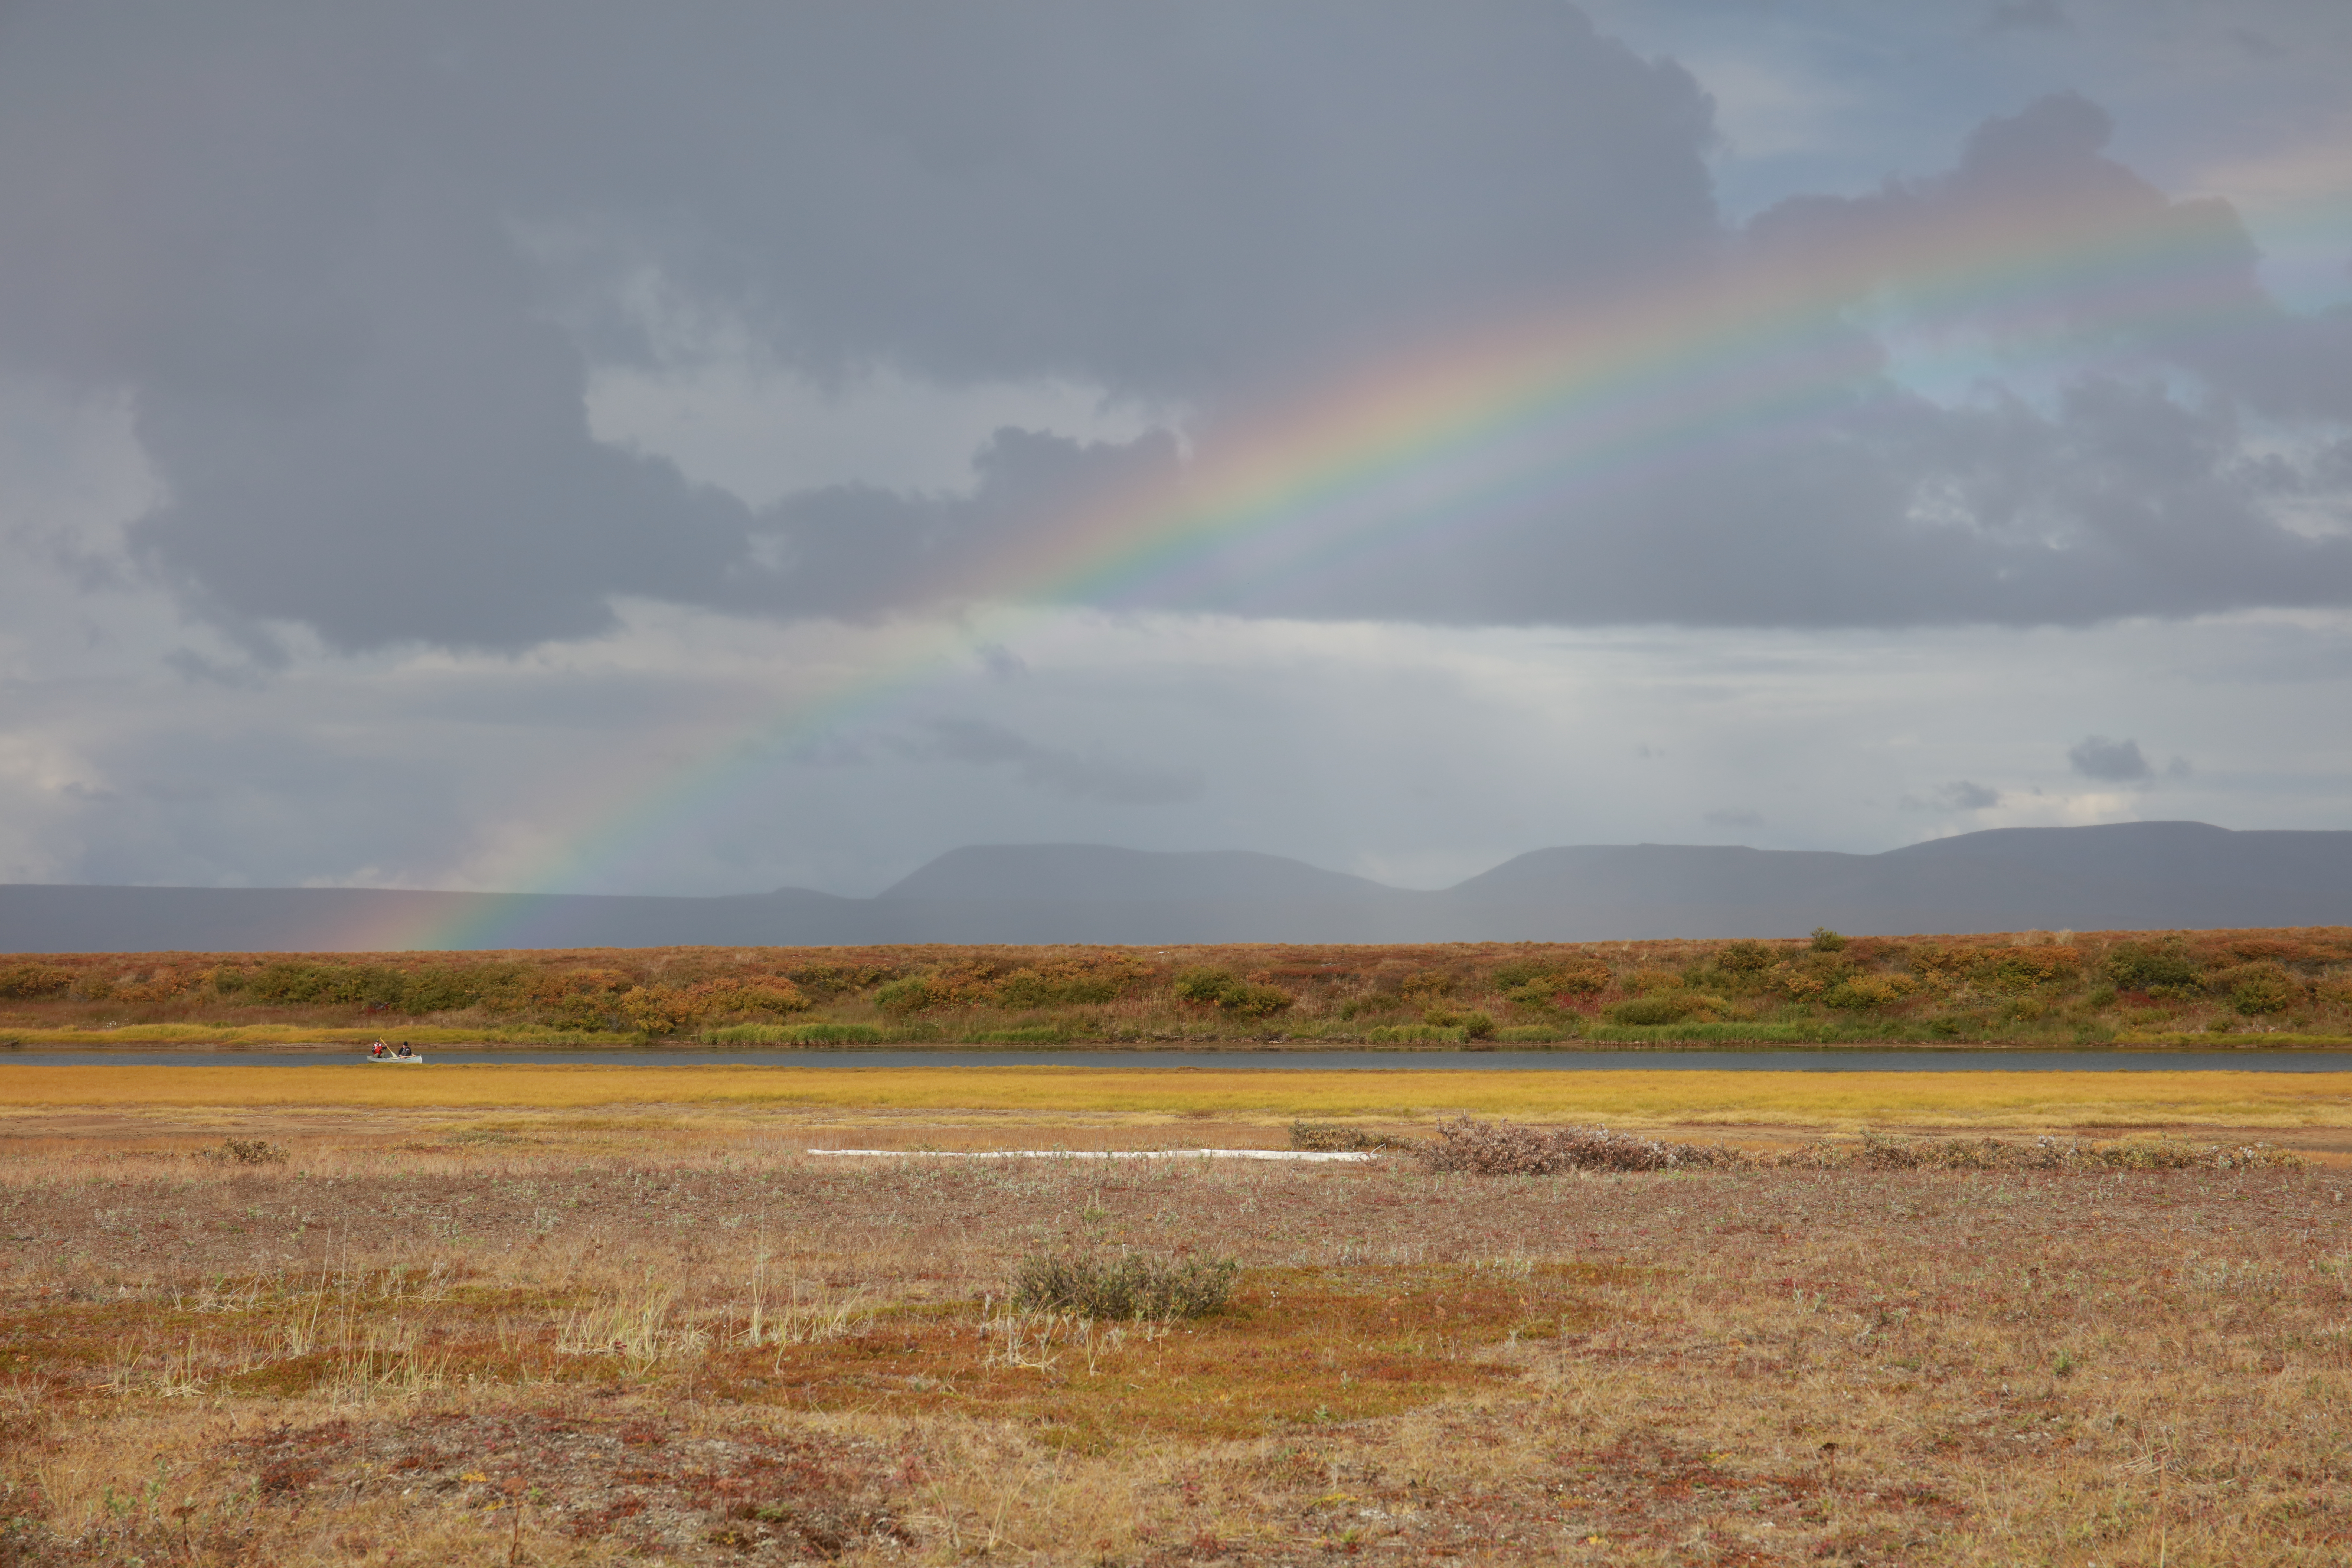 A rainbow stretched across a cloudy sky and above a yellow and green colored tundra landscape.